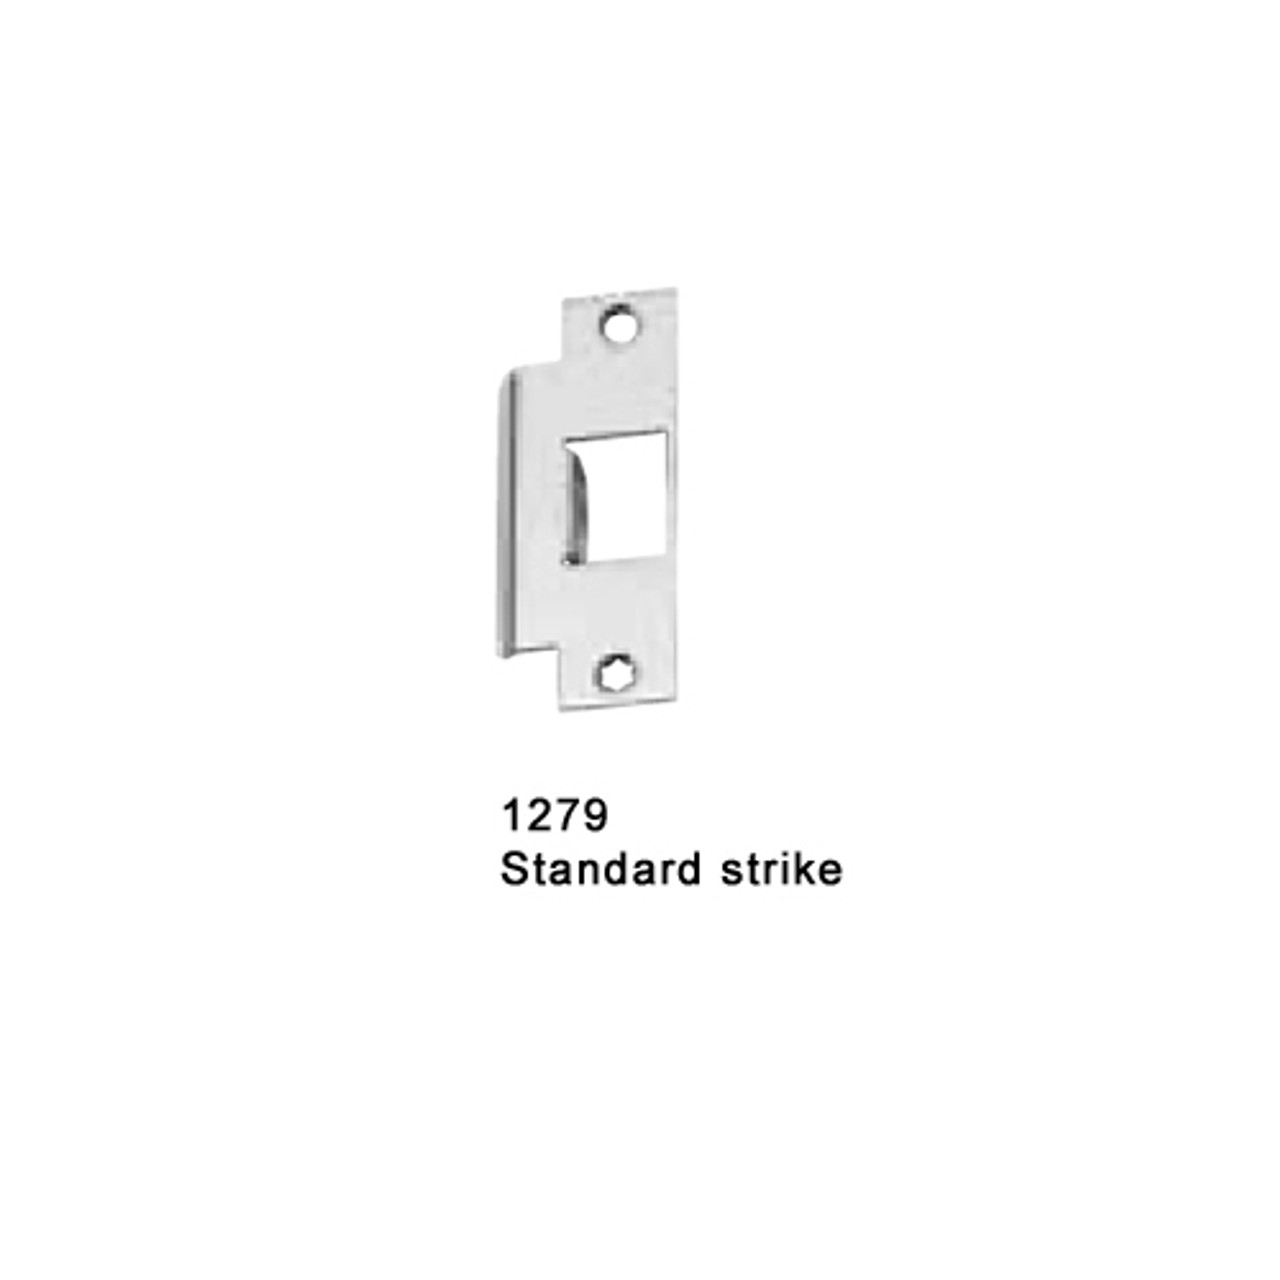 F-25-M-L-NL-Dane-US28-4-RHR Falcon 25 Series Fire Rated Mortise Lock Devices 510L-NL Dane Lever Trim with Night Latch in Anodized Aluminum